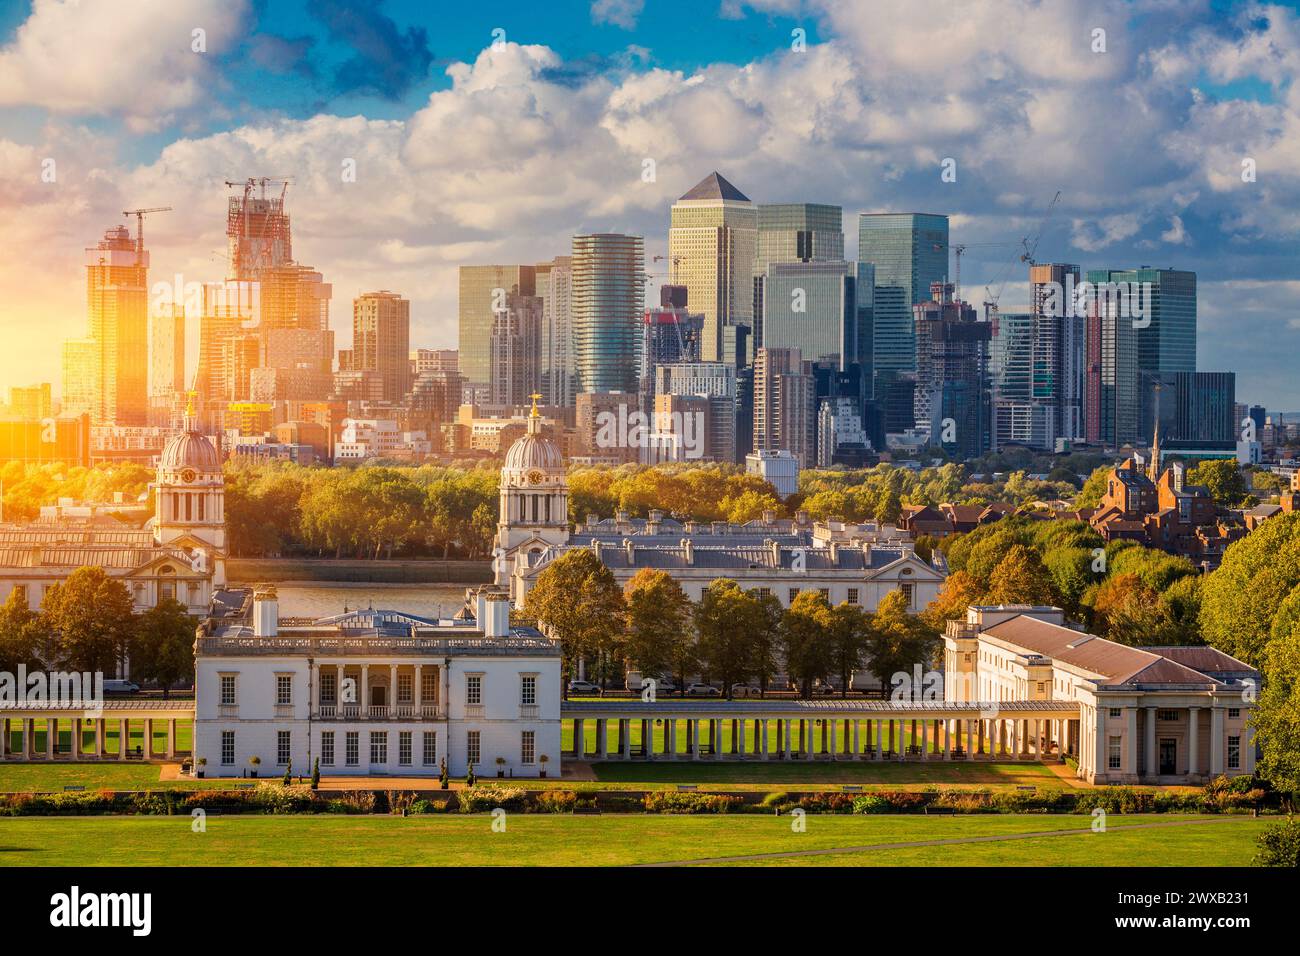 London at Sunset Light, England,  Skyline View Of Greenwich College and Canary Wharf At Golden Hour Sunset With Blue Sky And Clouds Stock Photo